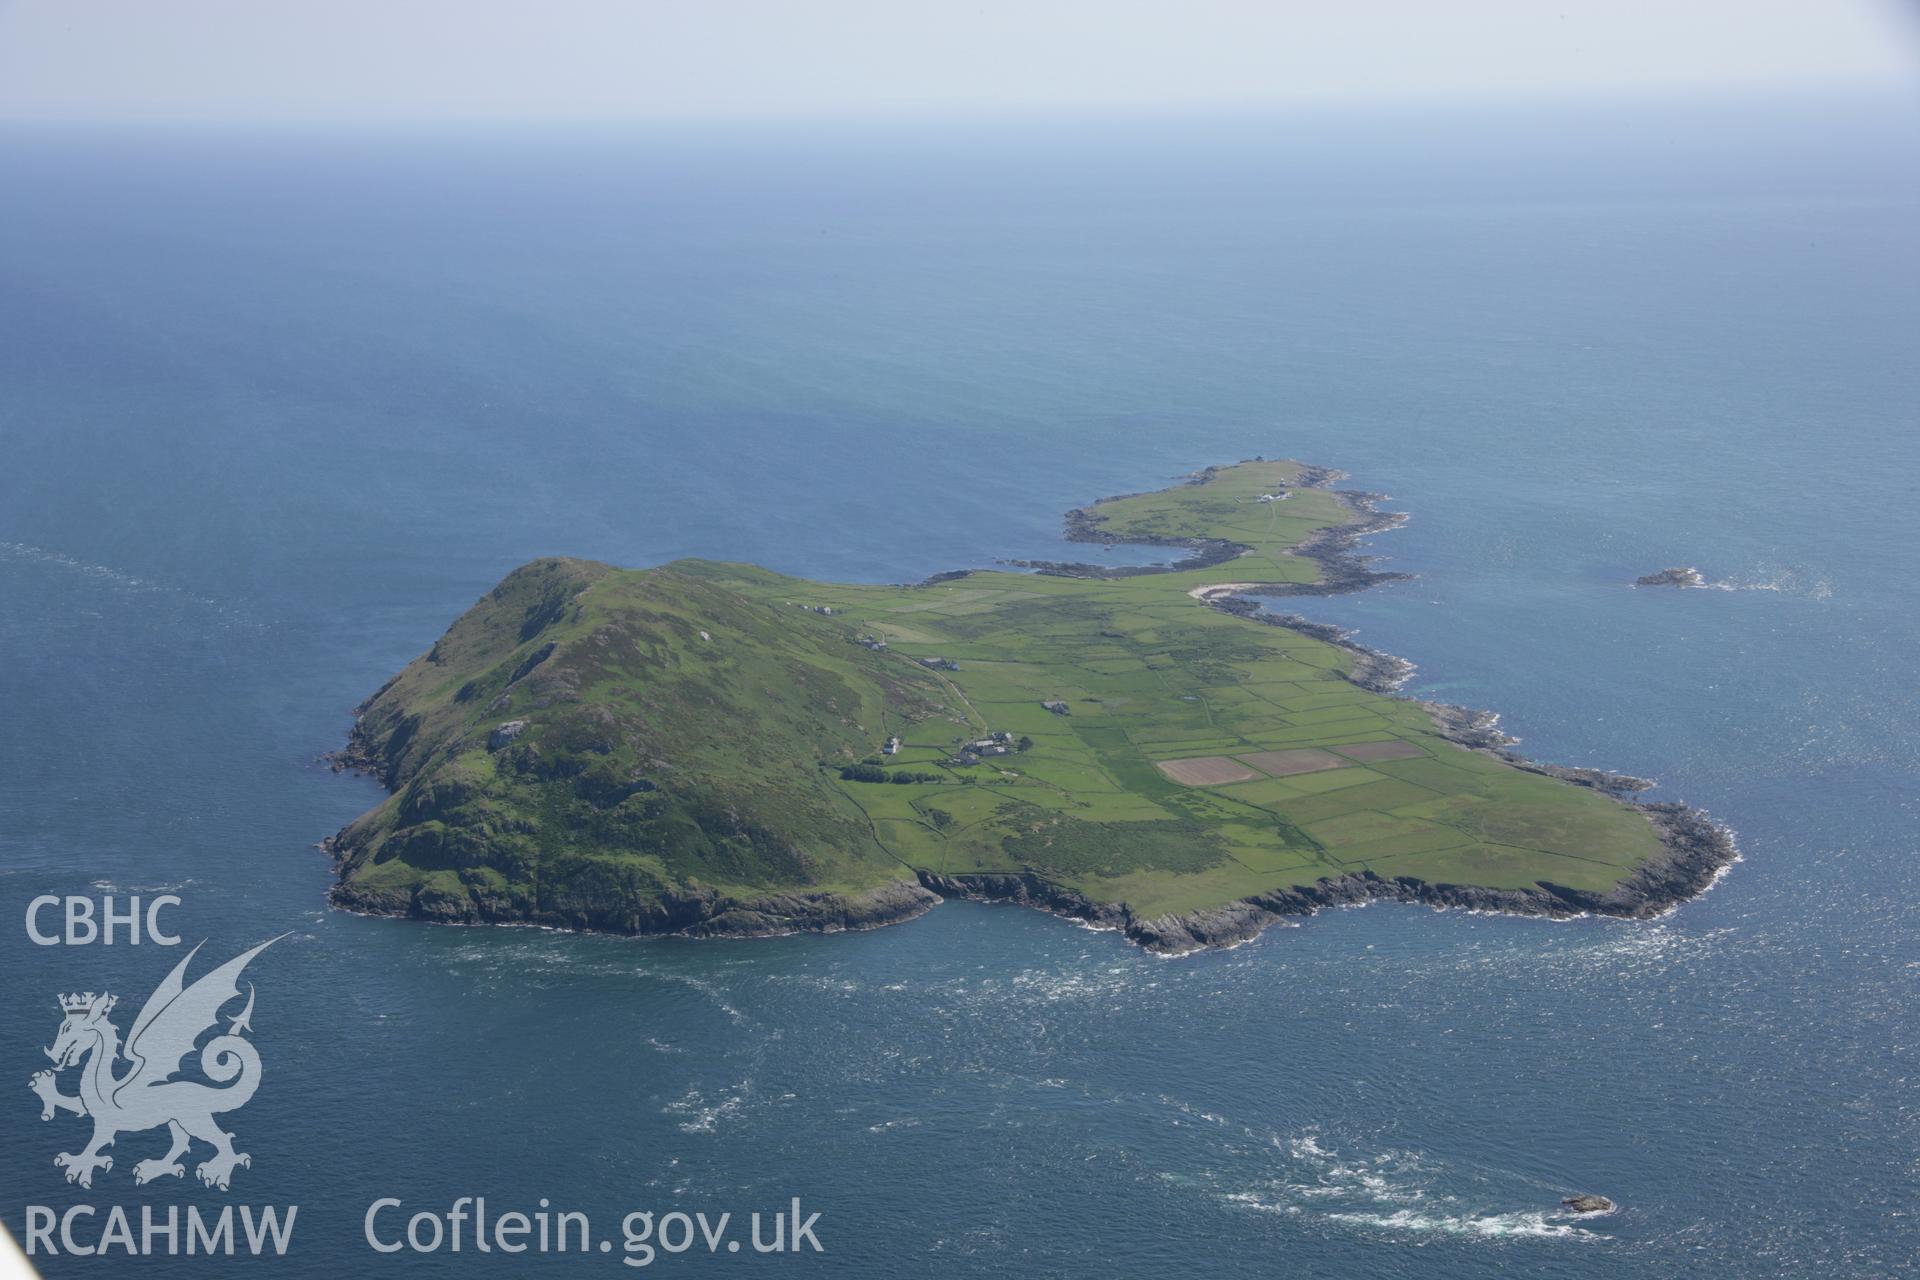 RCAHMW colour oblique aerial photograph of Bardsey Island (Ynys Enlli) from the north. Taken on 14 June 2006 by Toby Driver.